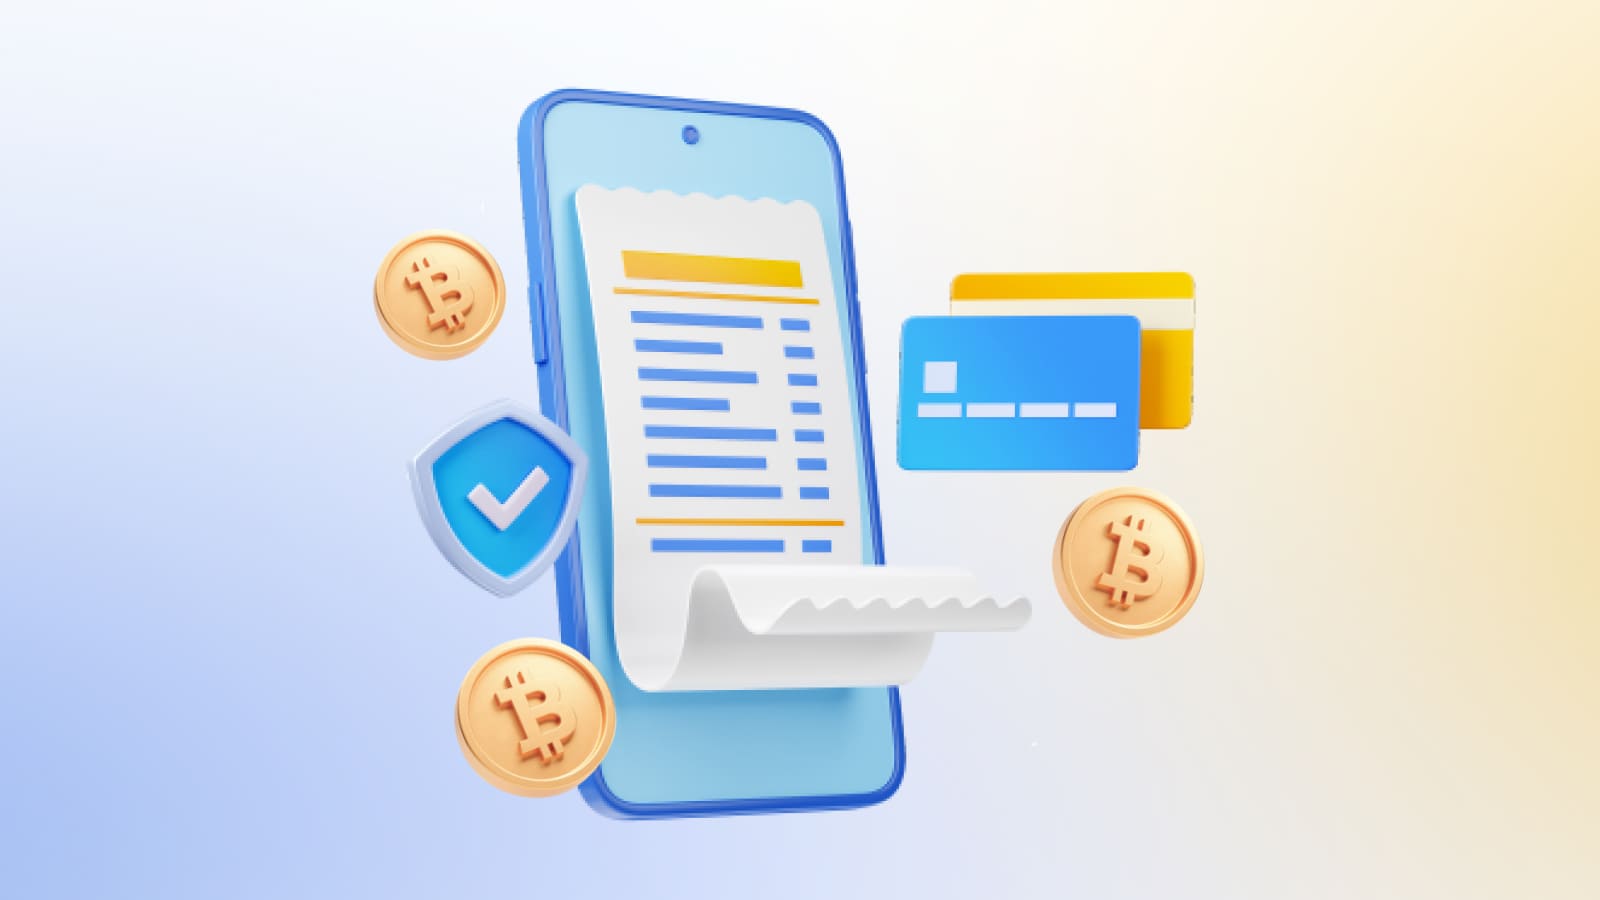 Accepting bank cards or processing crypto-payments: which one is better for business?